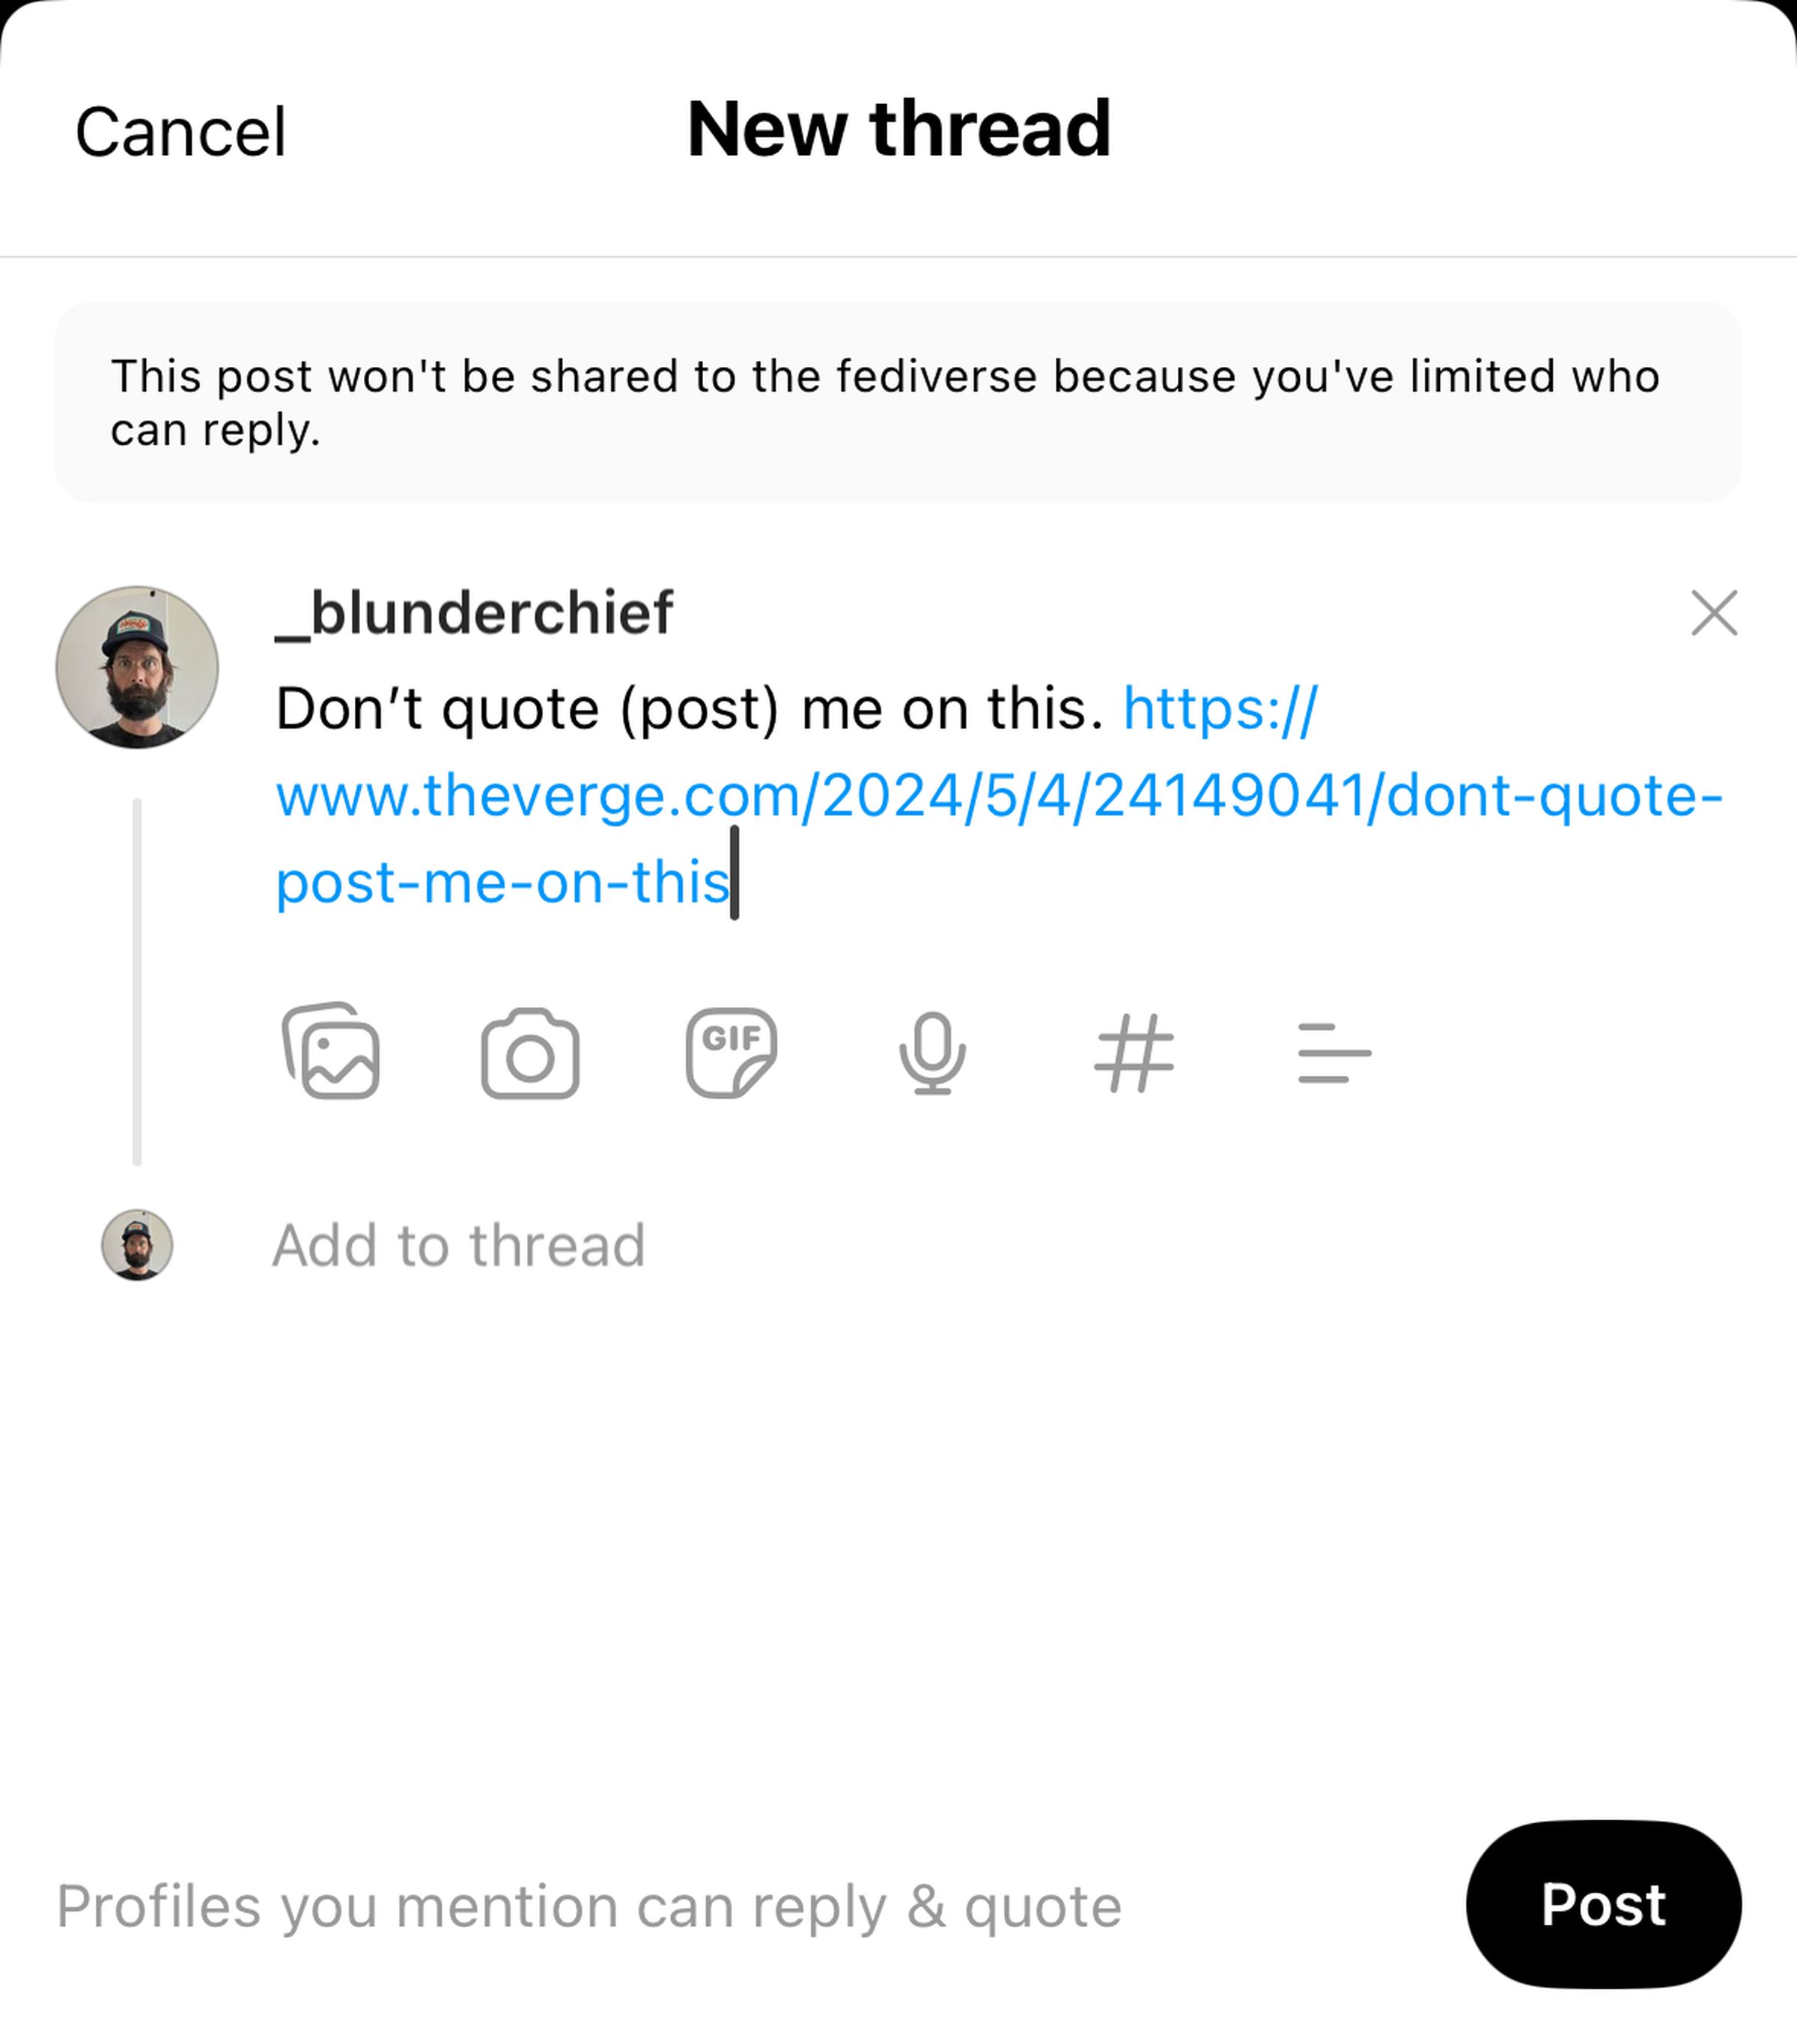 A screenshot of the new feature, with replies and quote posts limited only to those mentioned. At the top, it says the post won’t be shared with the fediverse because limits have been applied.